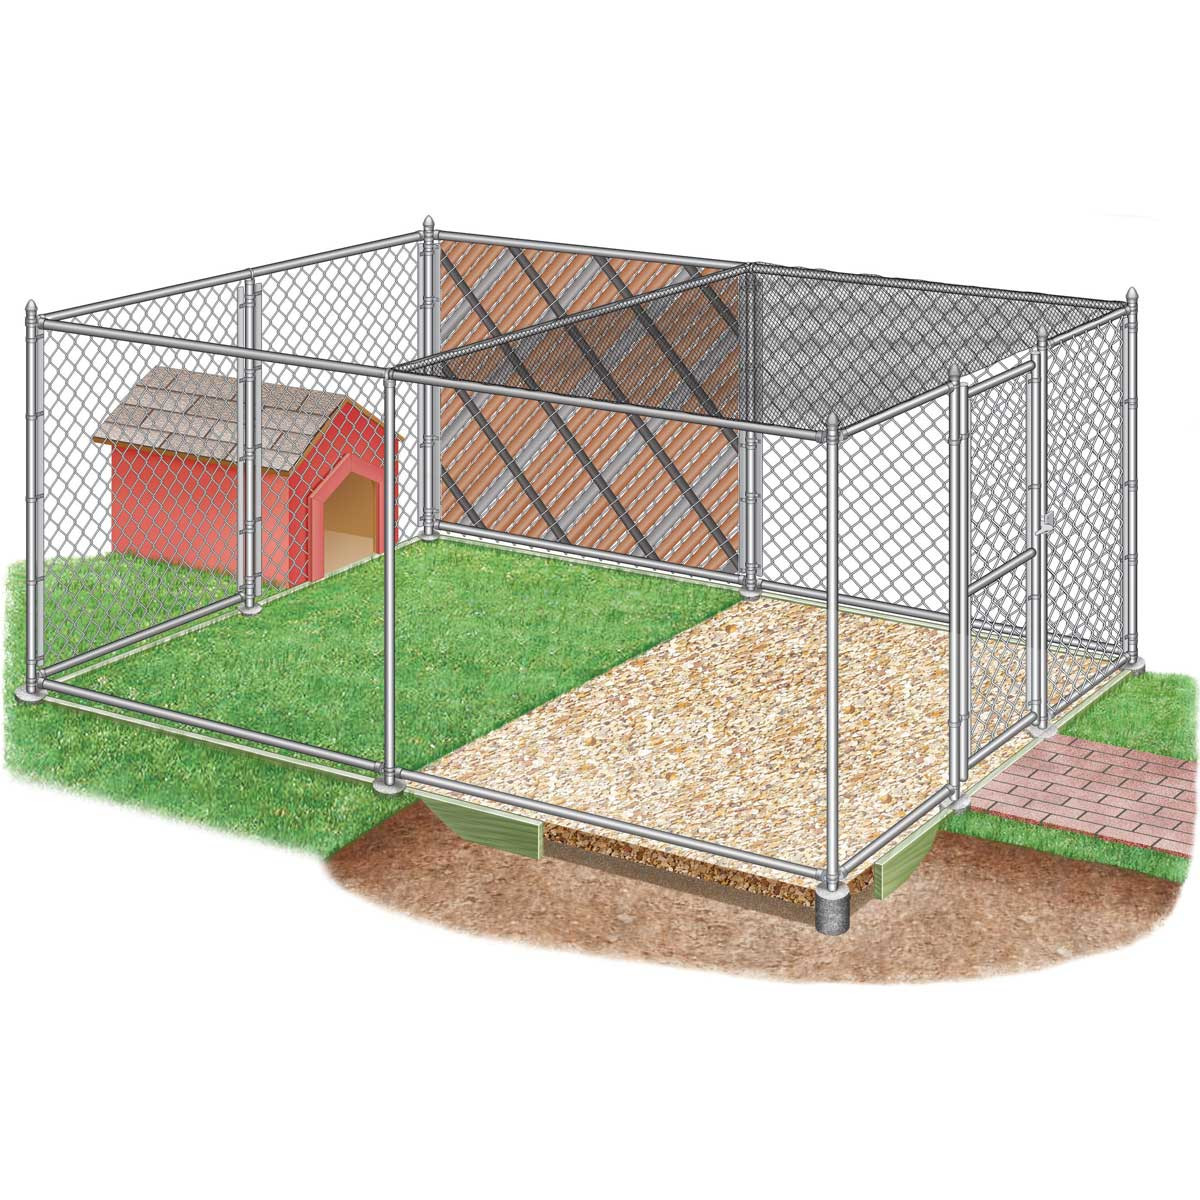 DIY Dog Pen Outdoor
 How to Build Chain Link Outdoor Dog Kennels